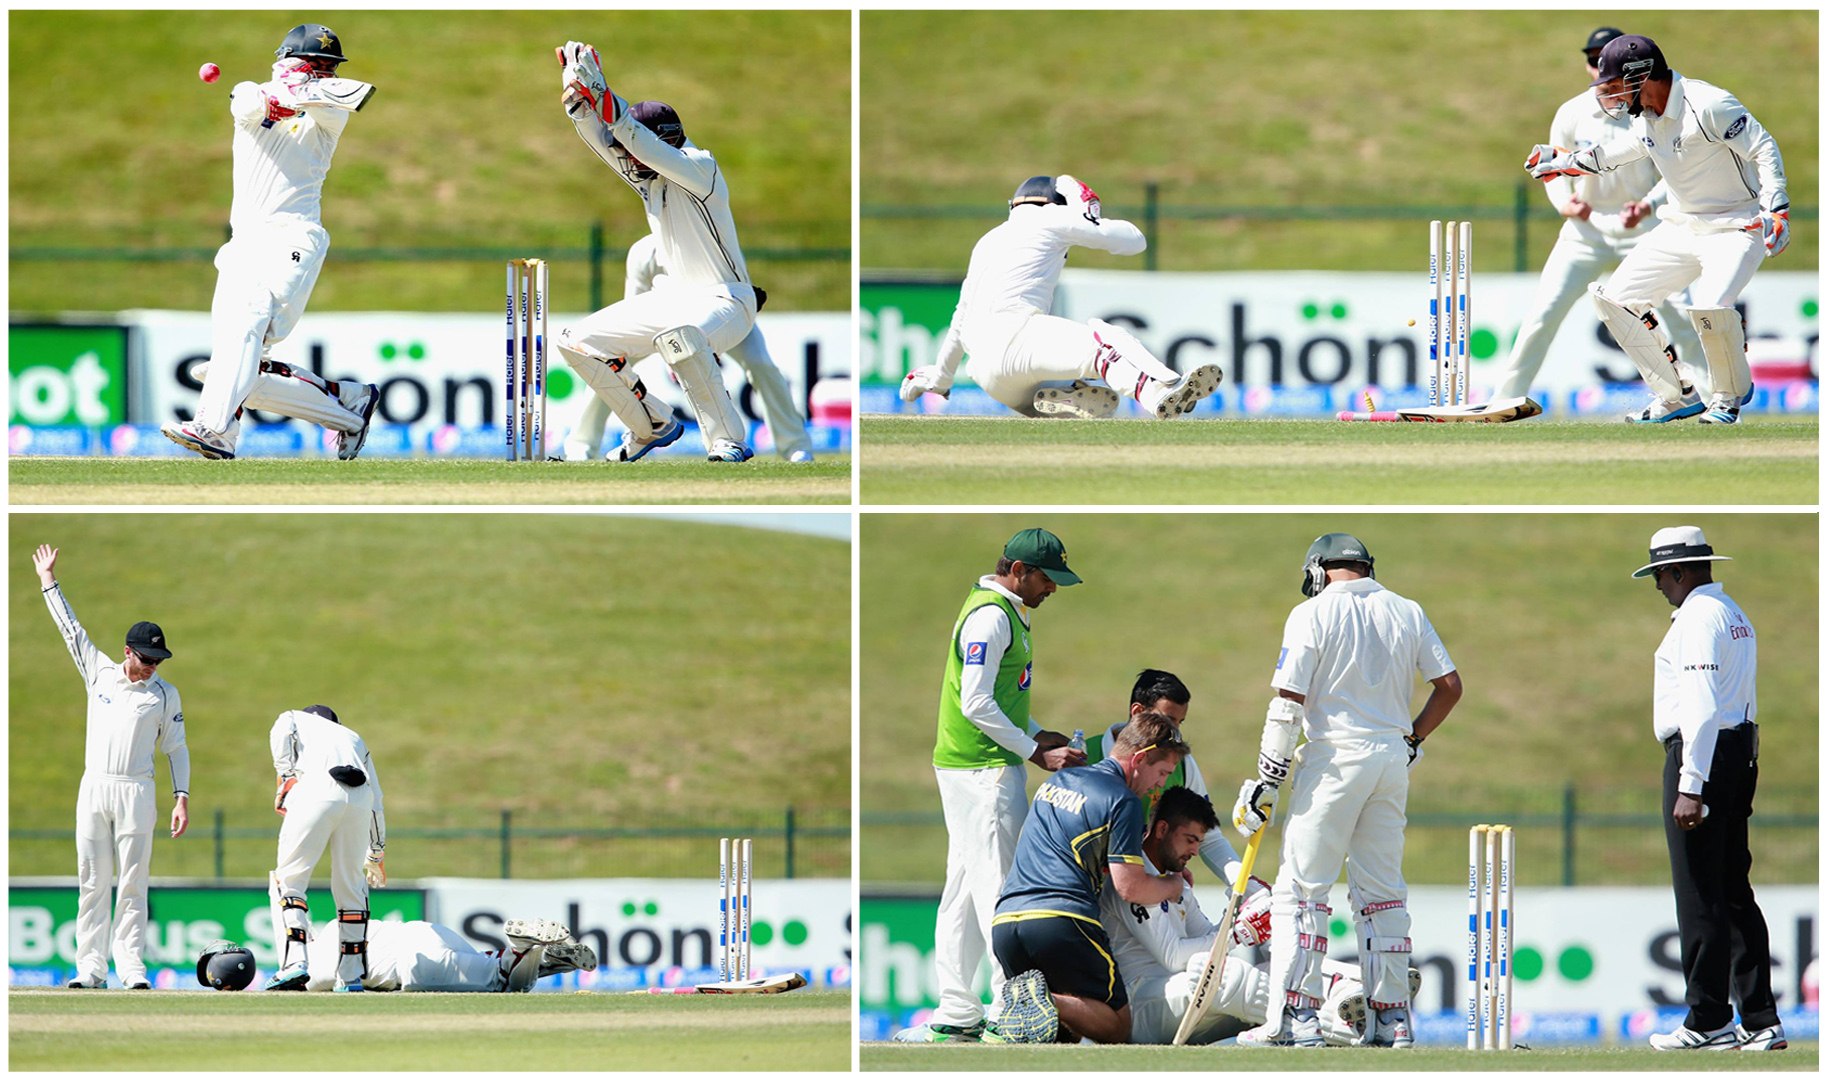 Pakistan vs New Zealand: Ahmed Shehzad suffers fractured skull in 1st Test